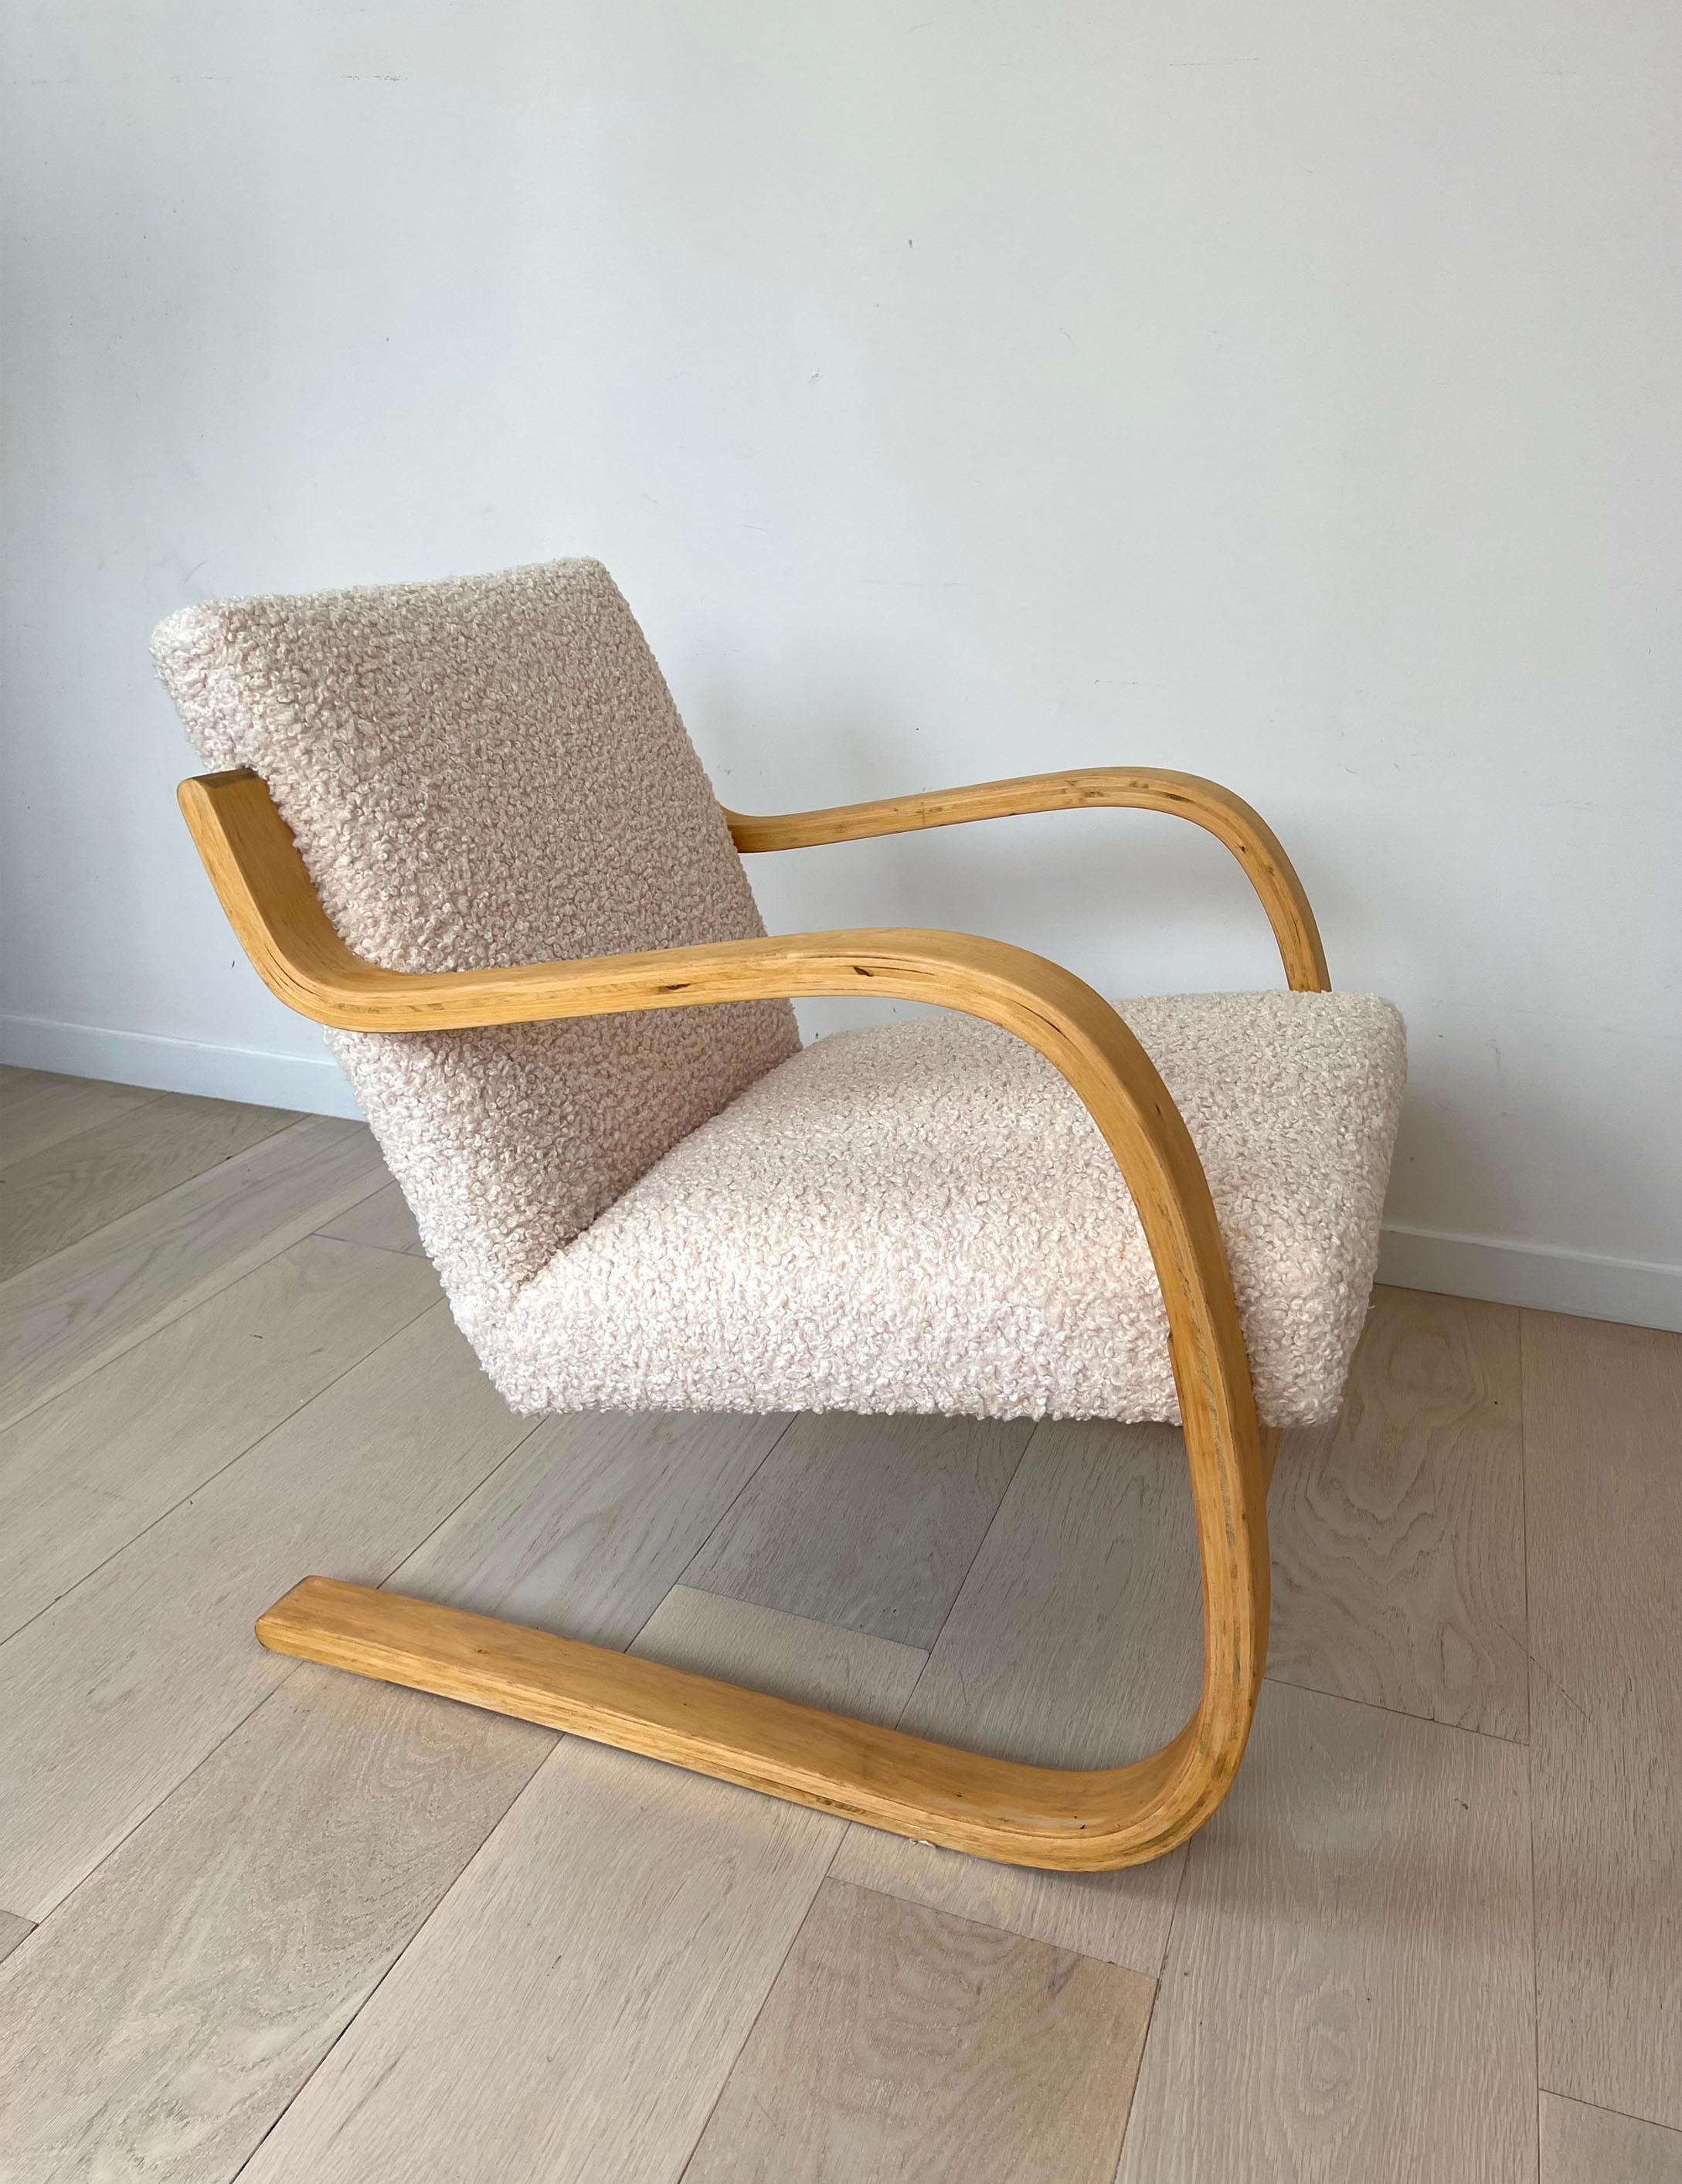 20th Century 1960s, Alvar Aalto Birch Bentwood Chair Upholstered in Fluffy Boucle Shearling